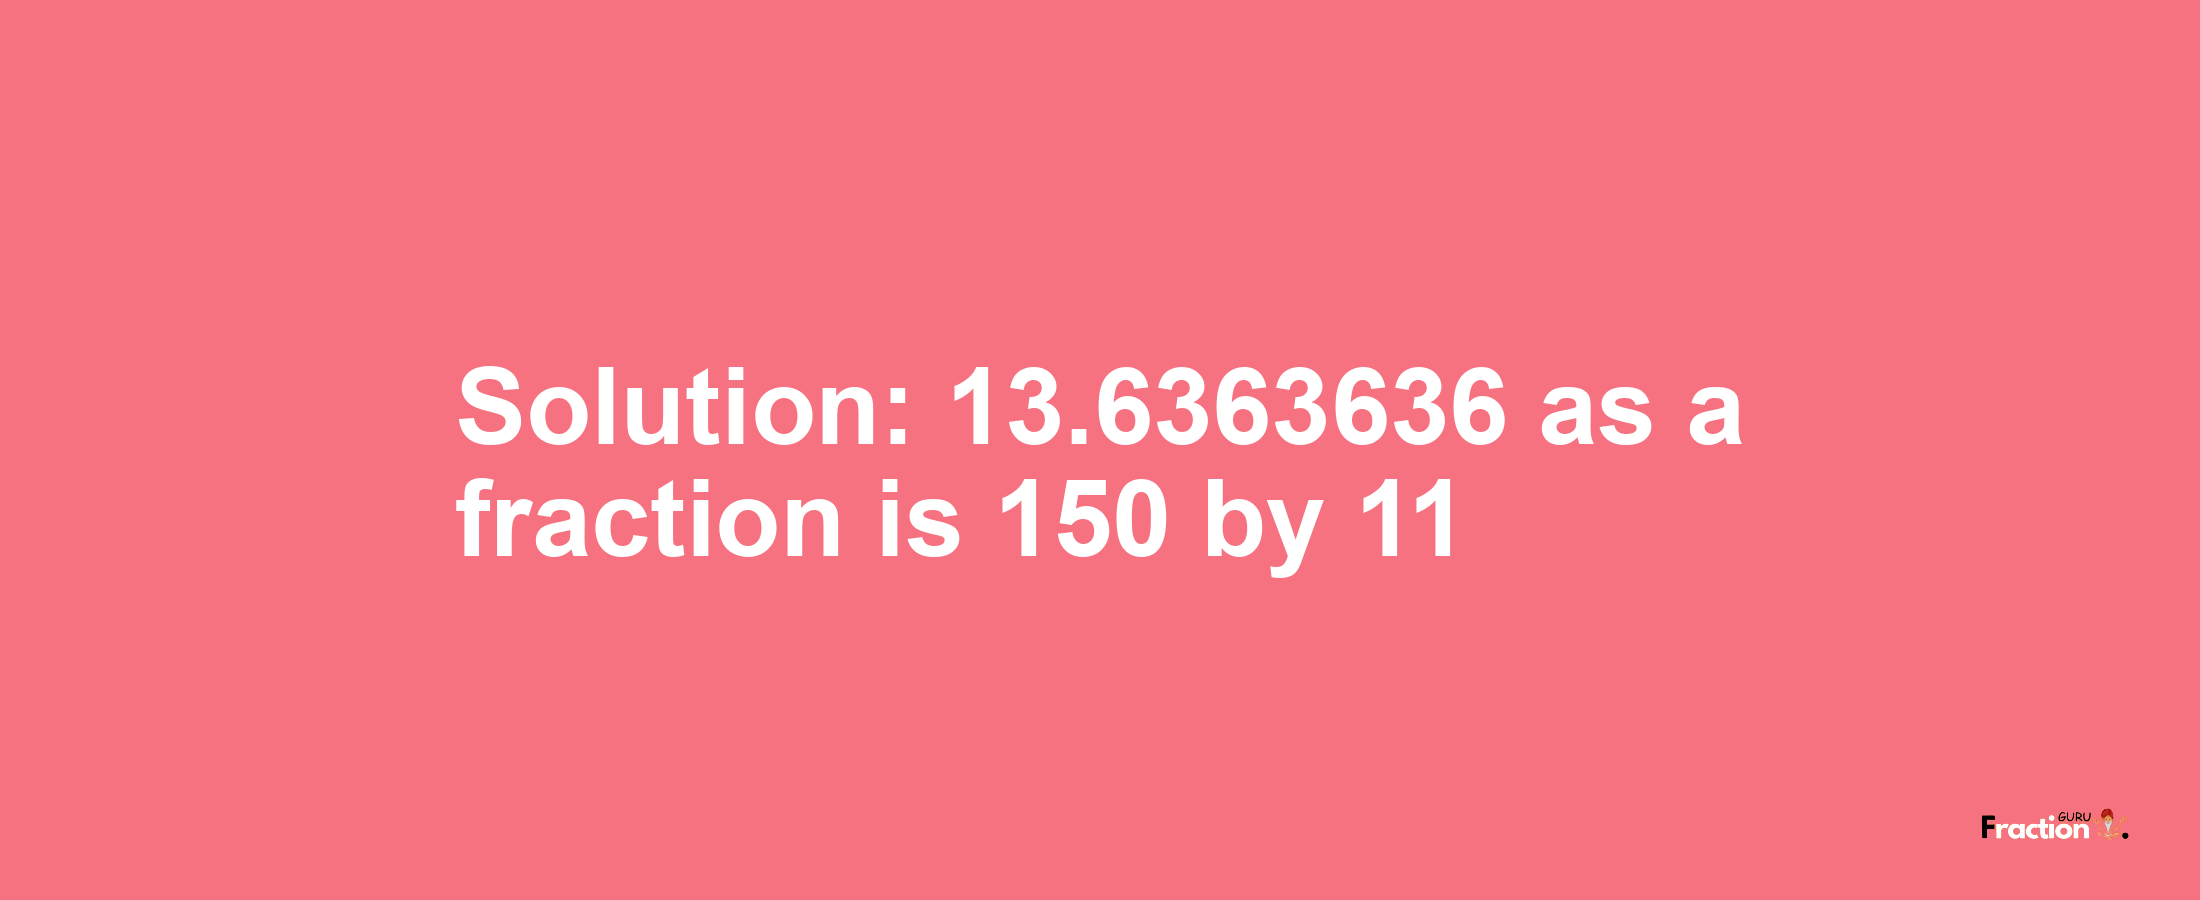 Solution:13.6363636 as a fraction is 150/11